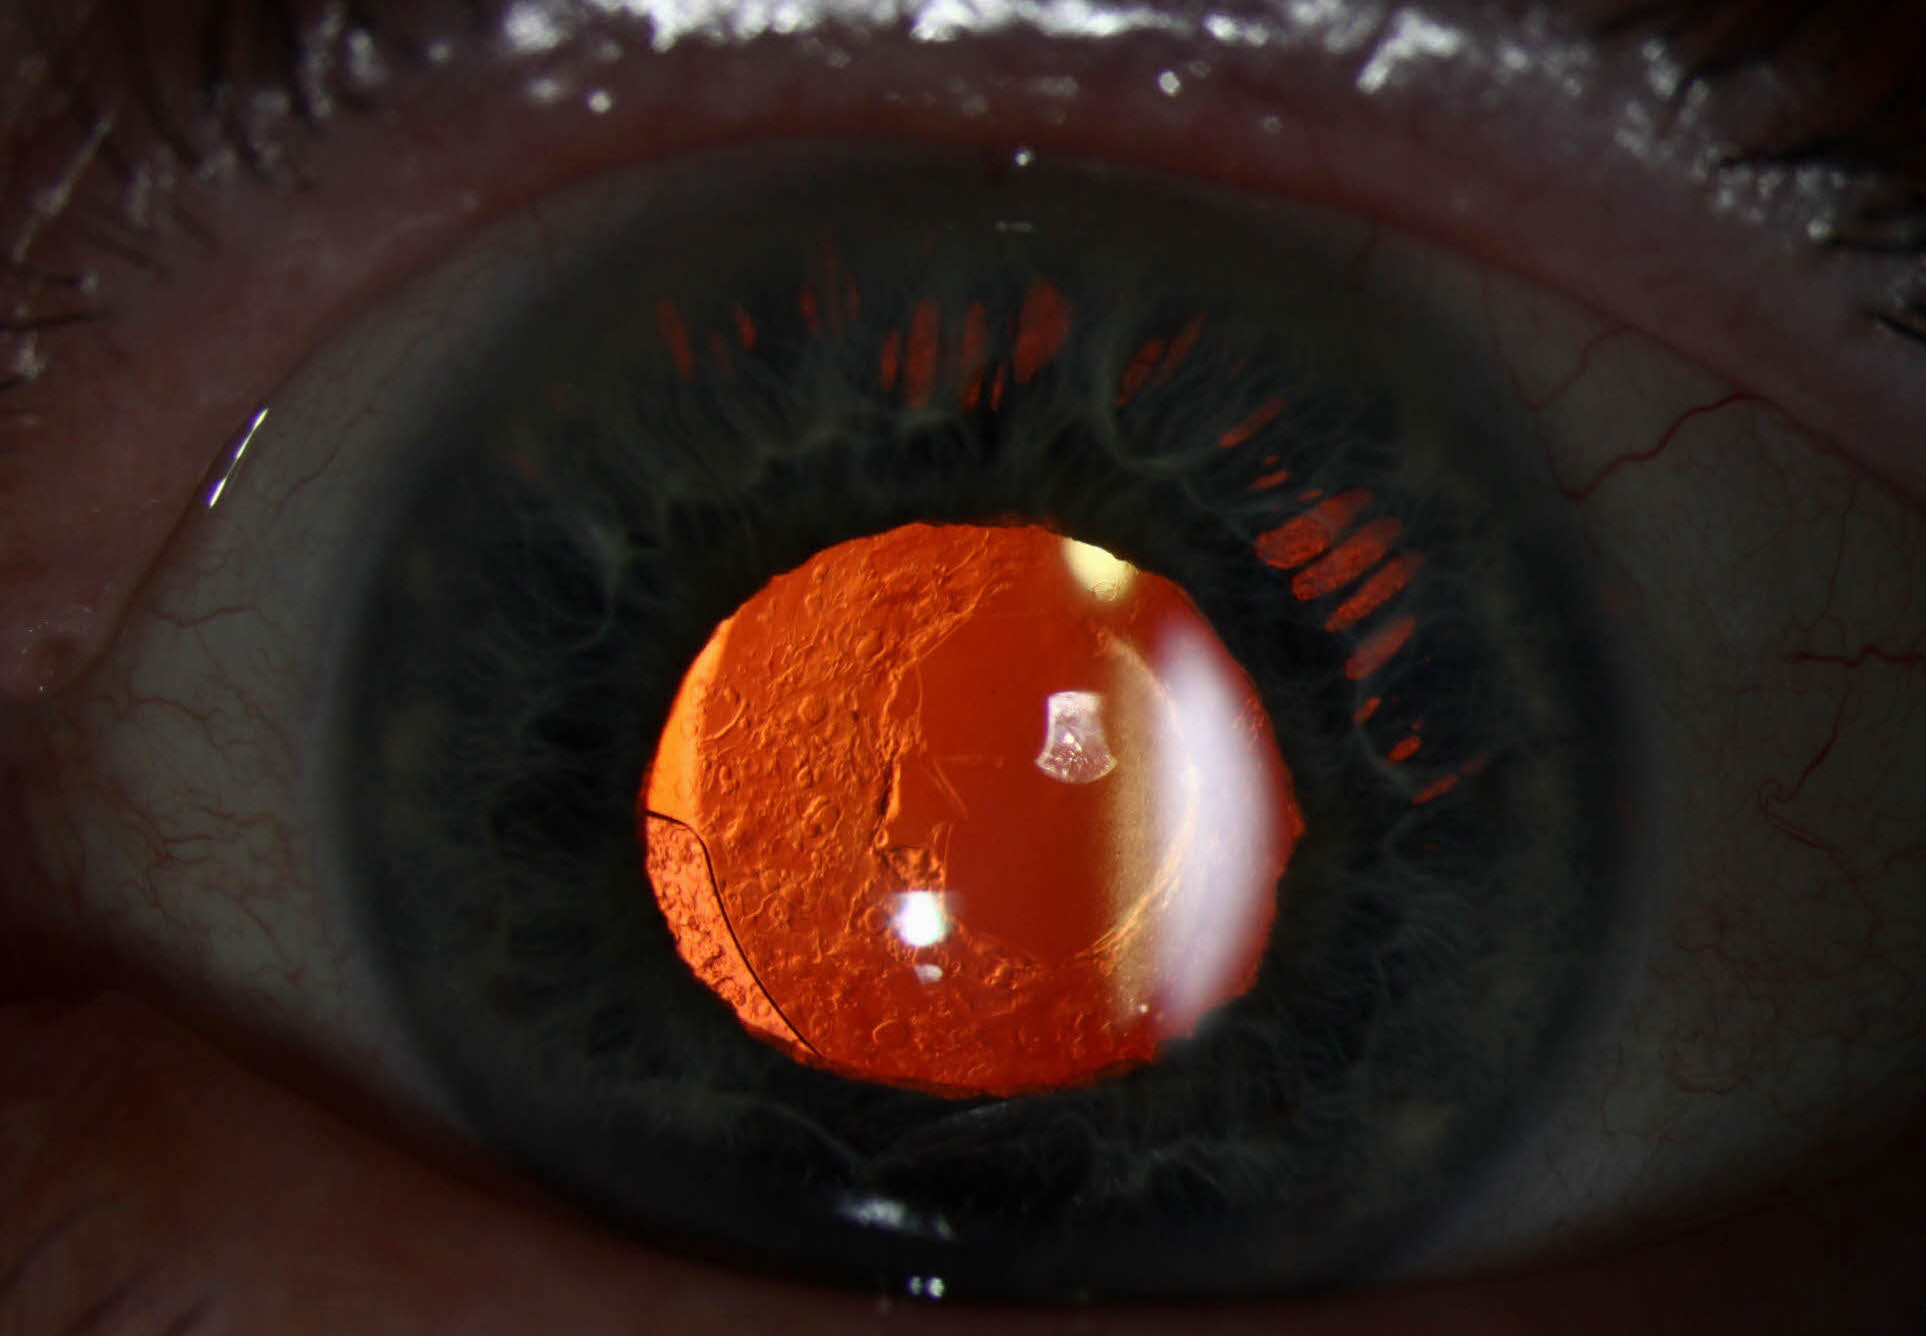 Advanced nurse practitioners who completed YAG capsulotomy training performed the procedure with the same rate of effectiveness as ophthalmologists in this study.